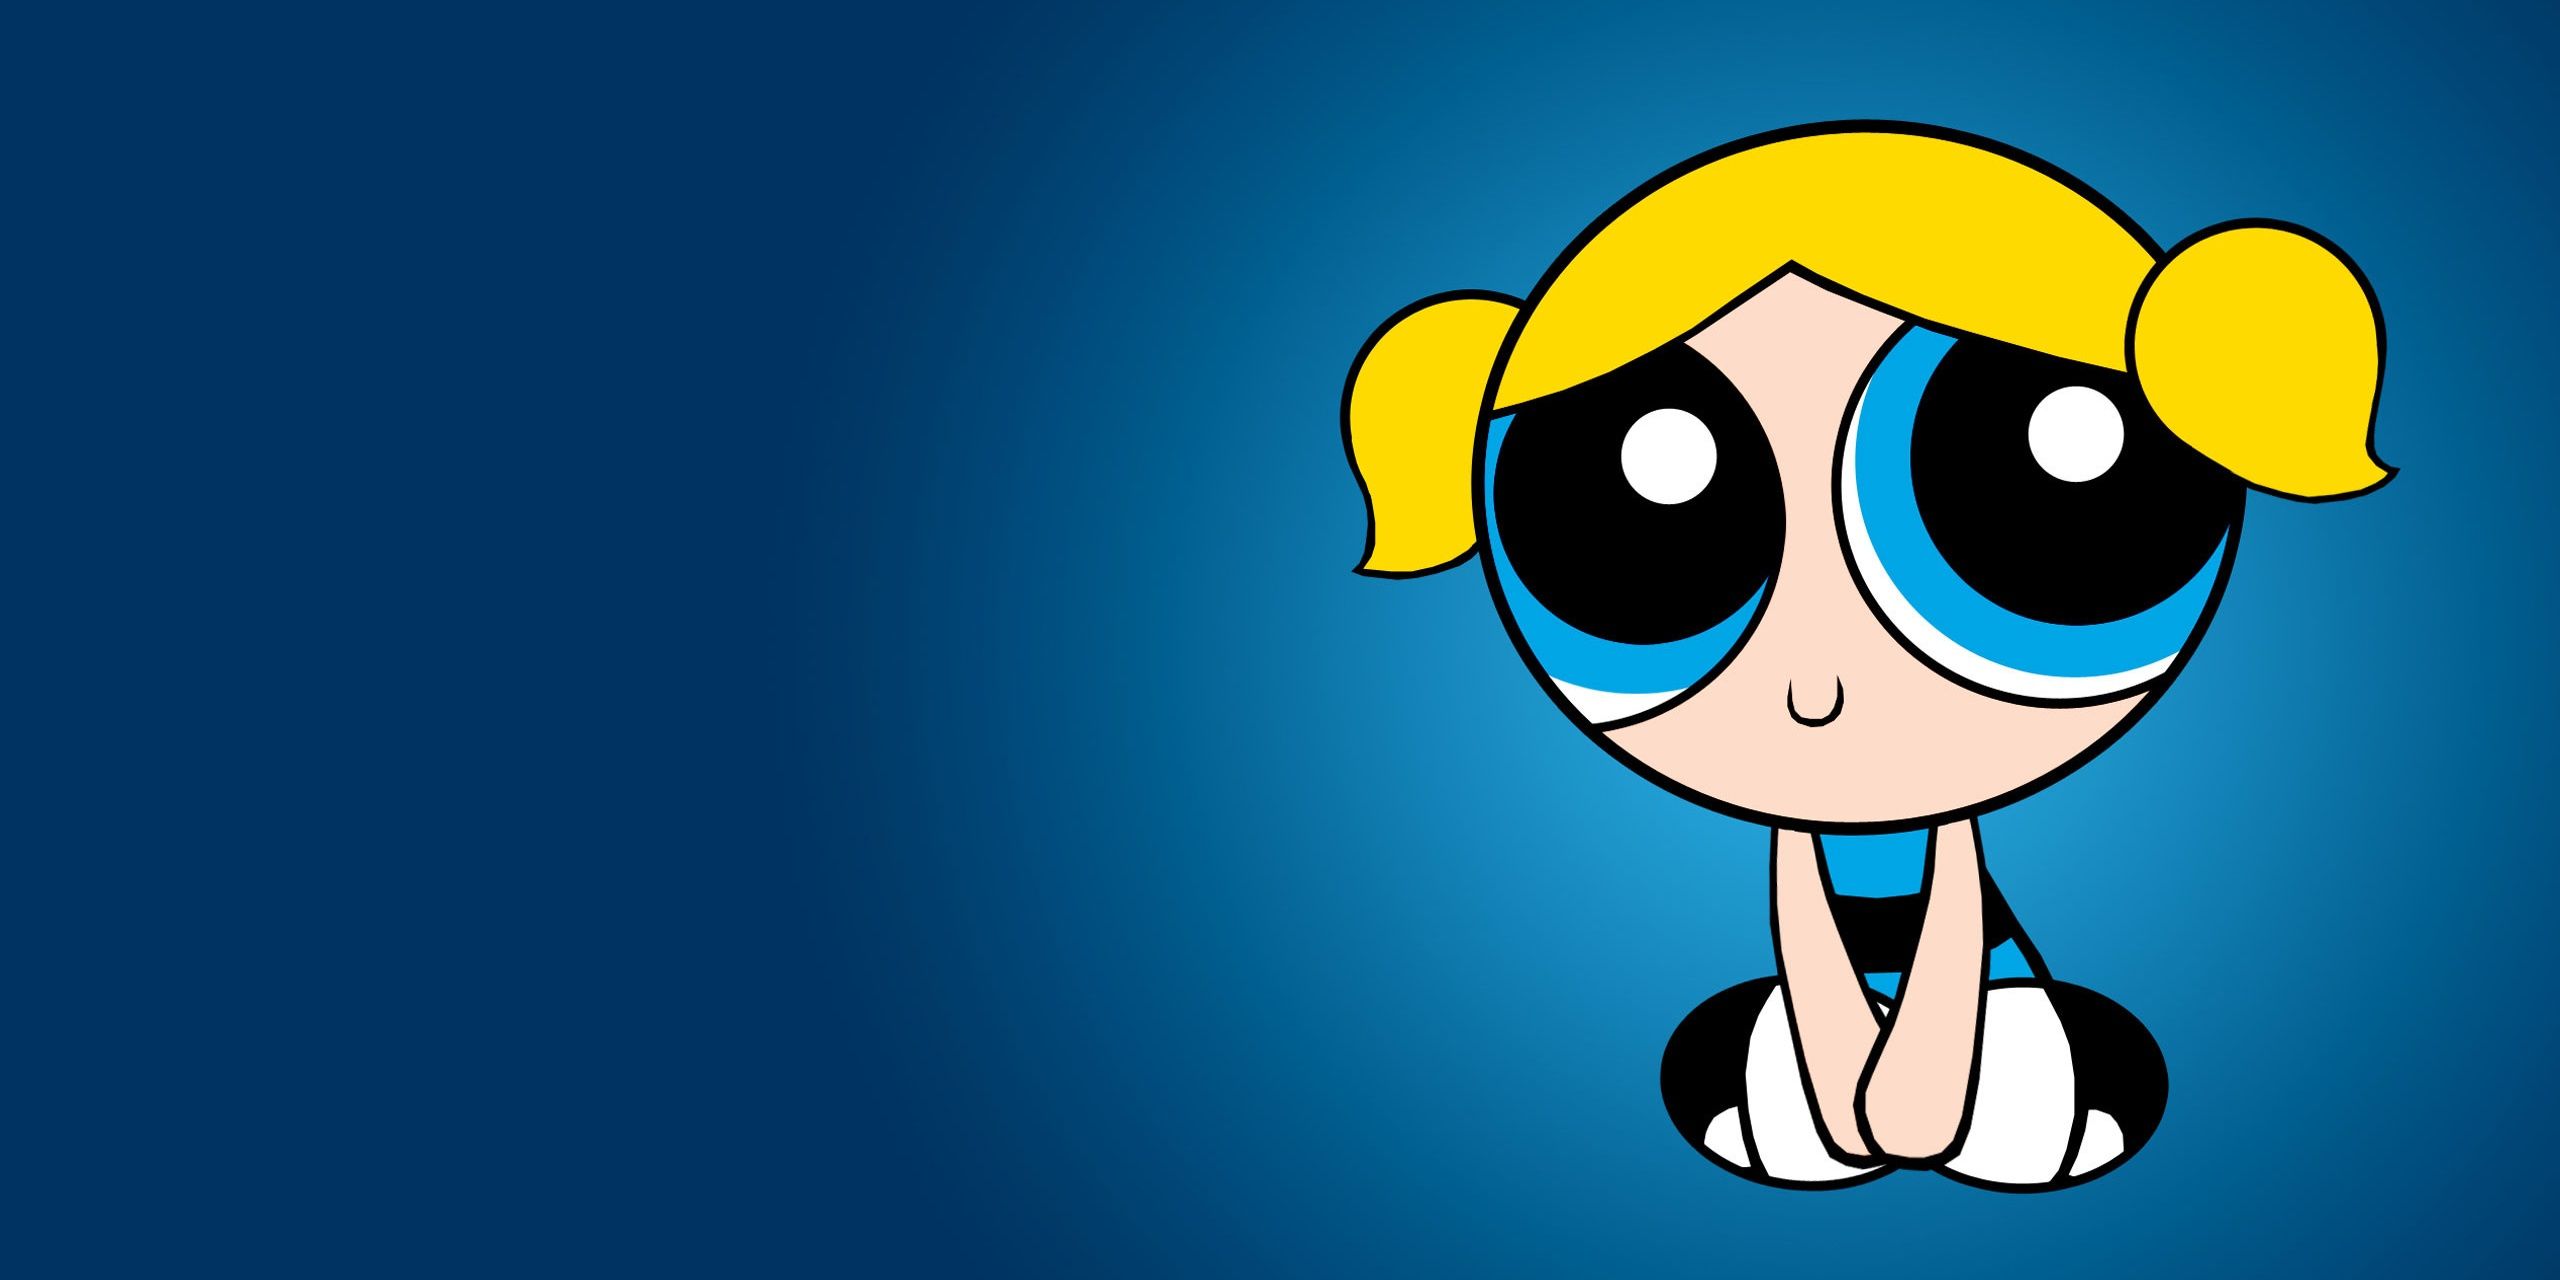 Powerpuff Girls Quotes That Prove Girls Rule